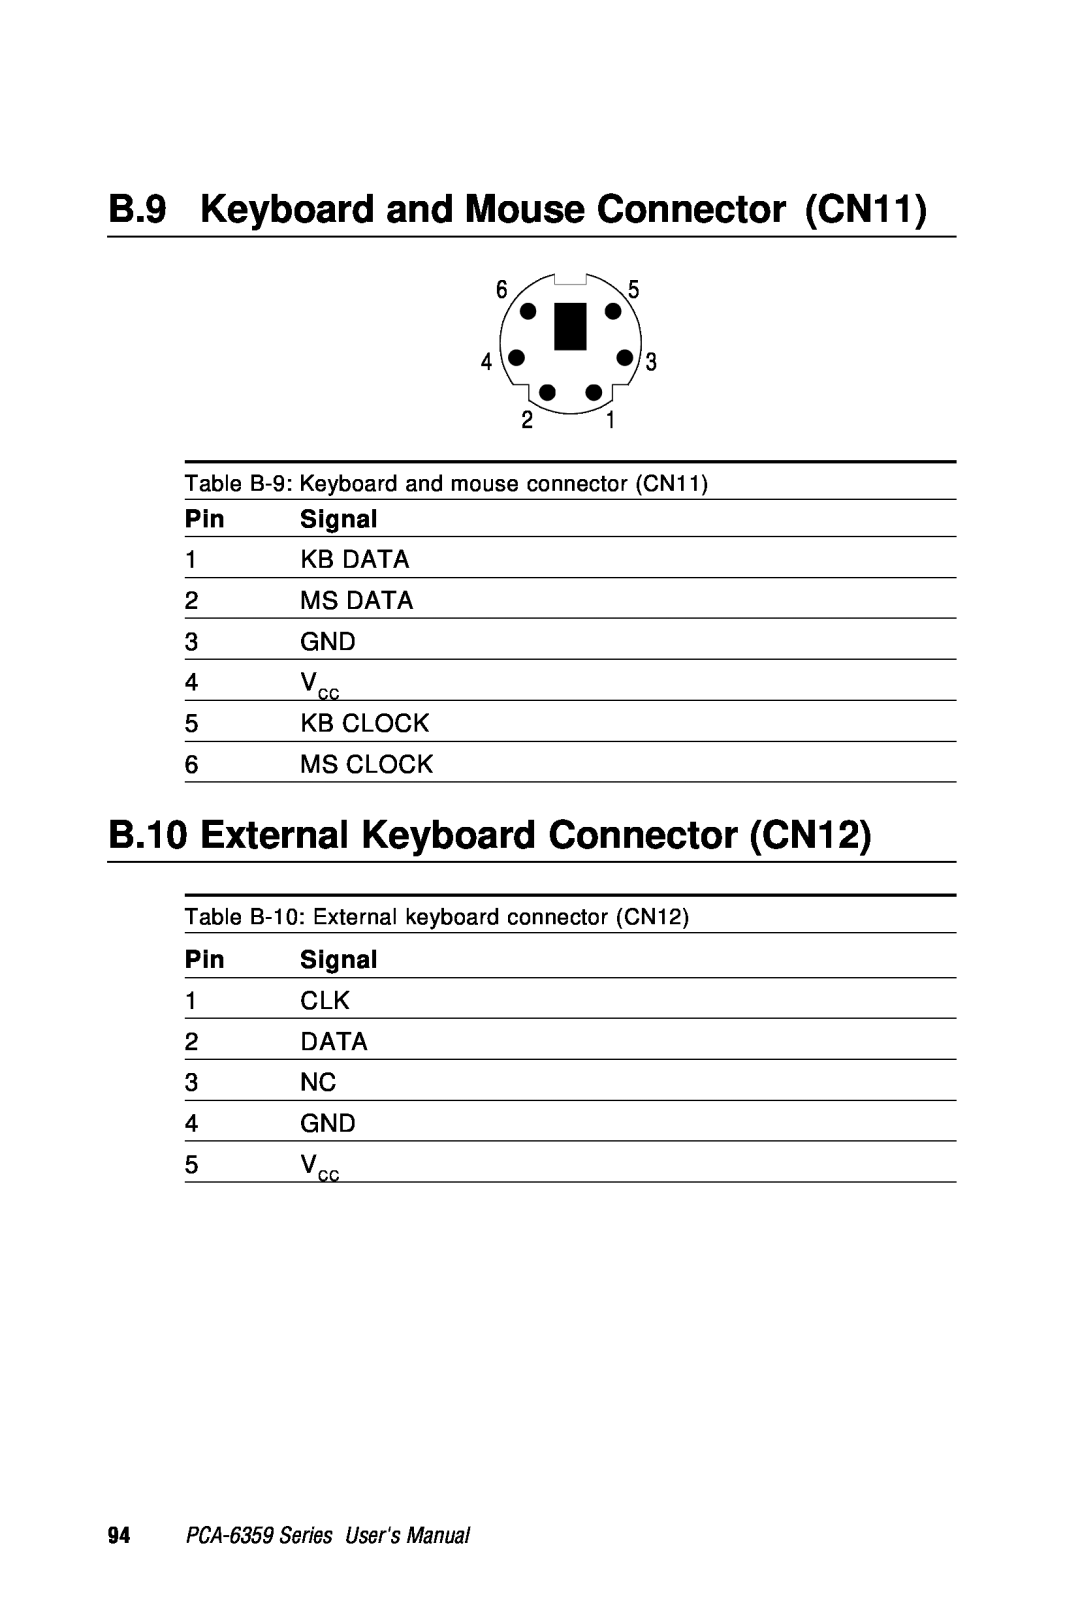 Advantech PCA-6359 user manual B.9 Keyboard and Mouse Connector CN11, B.10 External Keyboard Connector CN12, 4 VCC, 5 VCC 